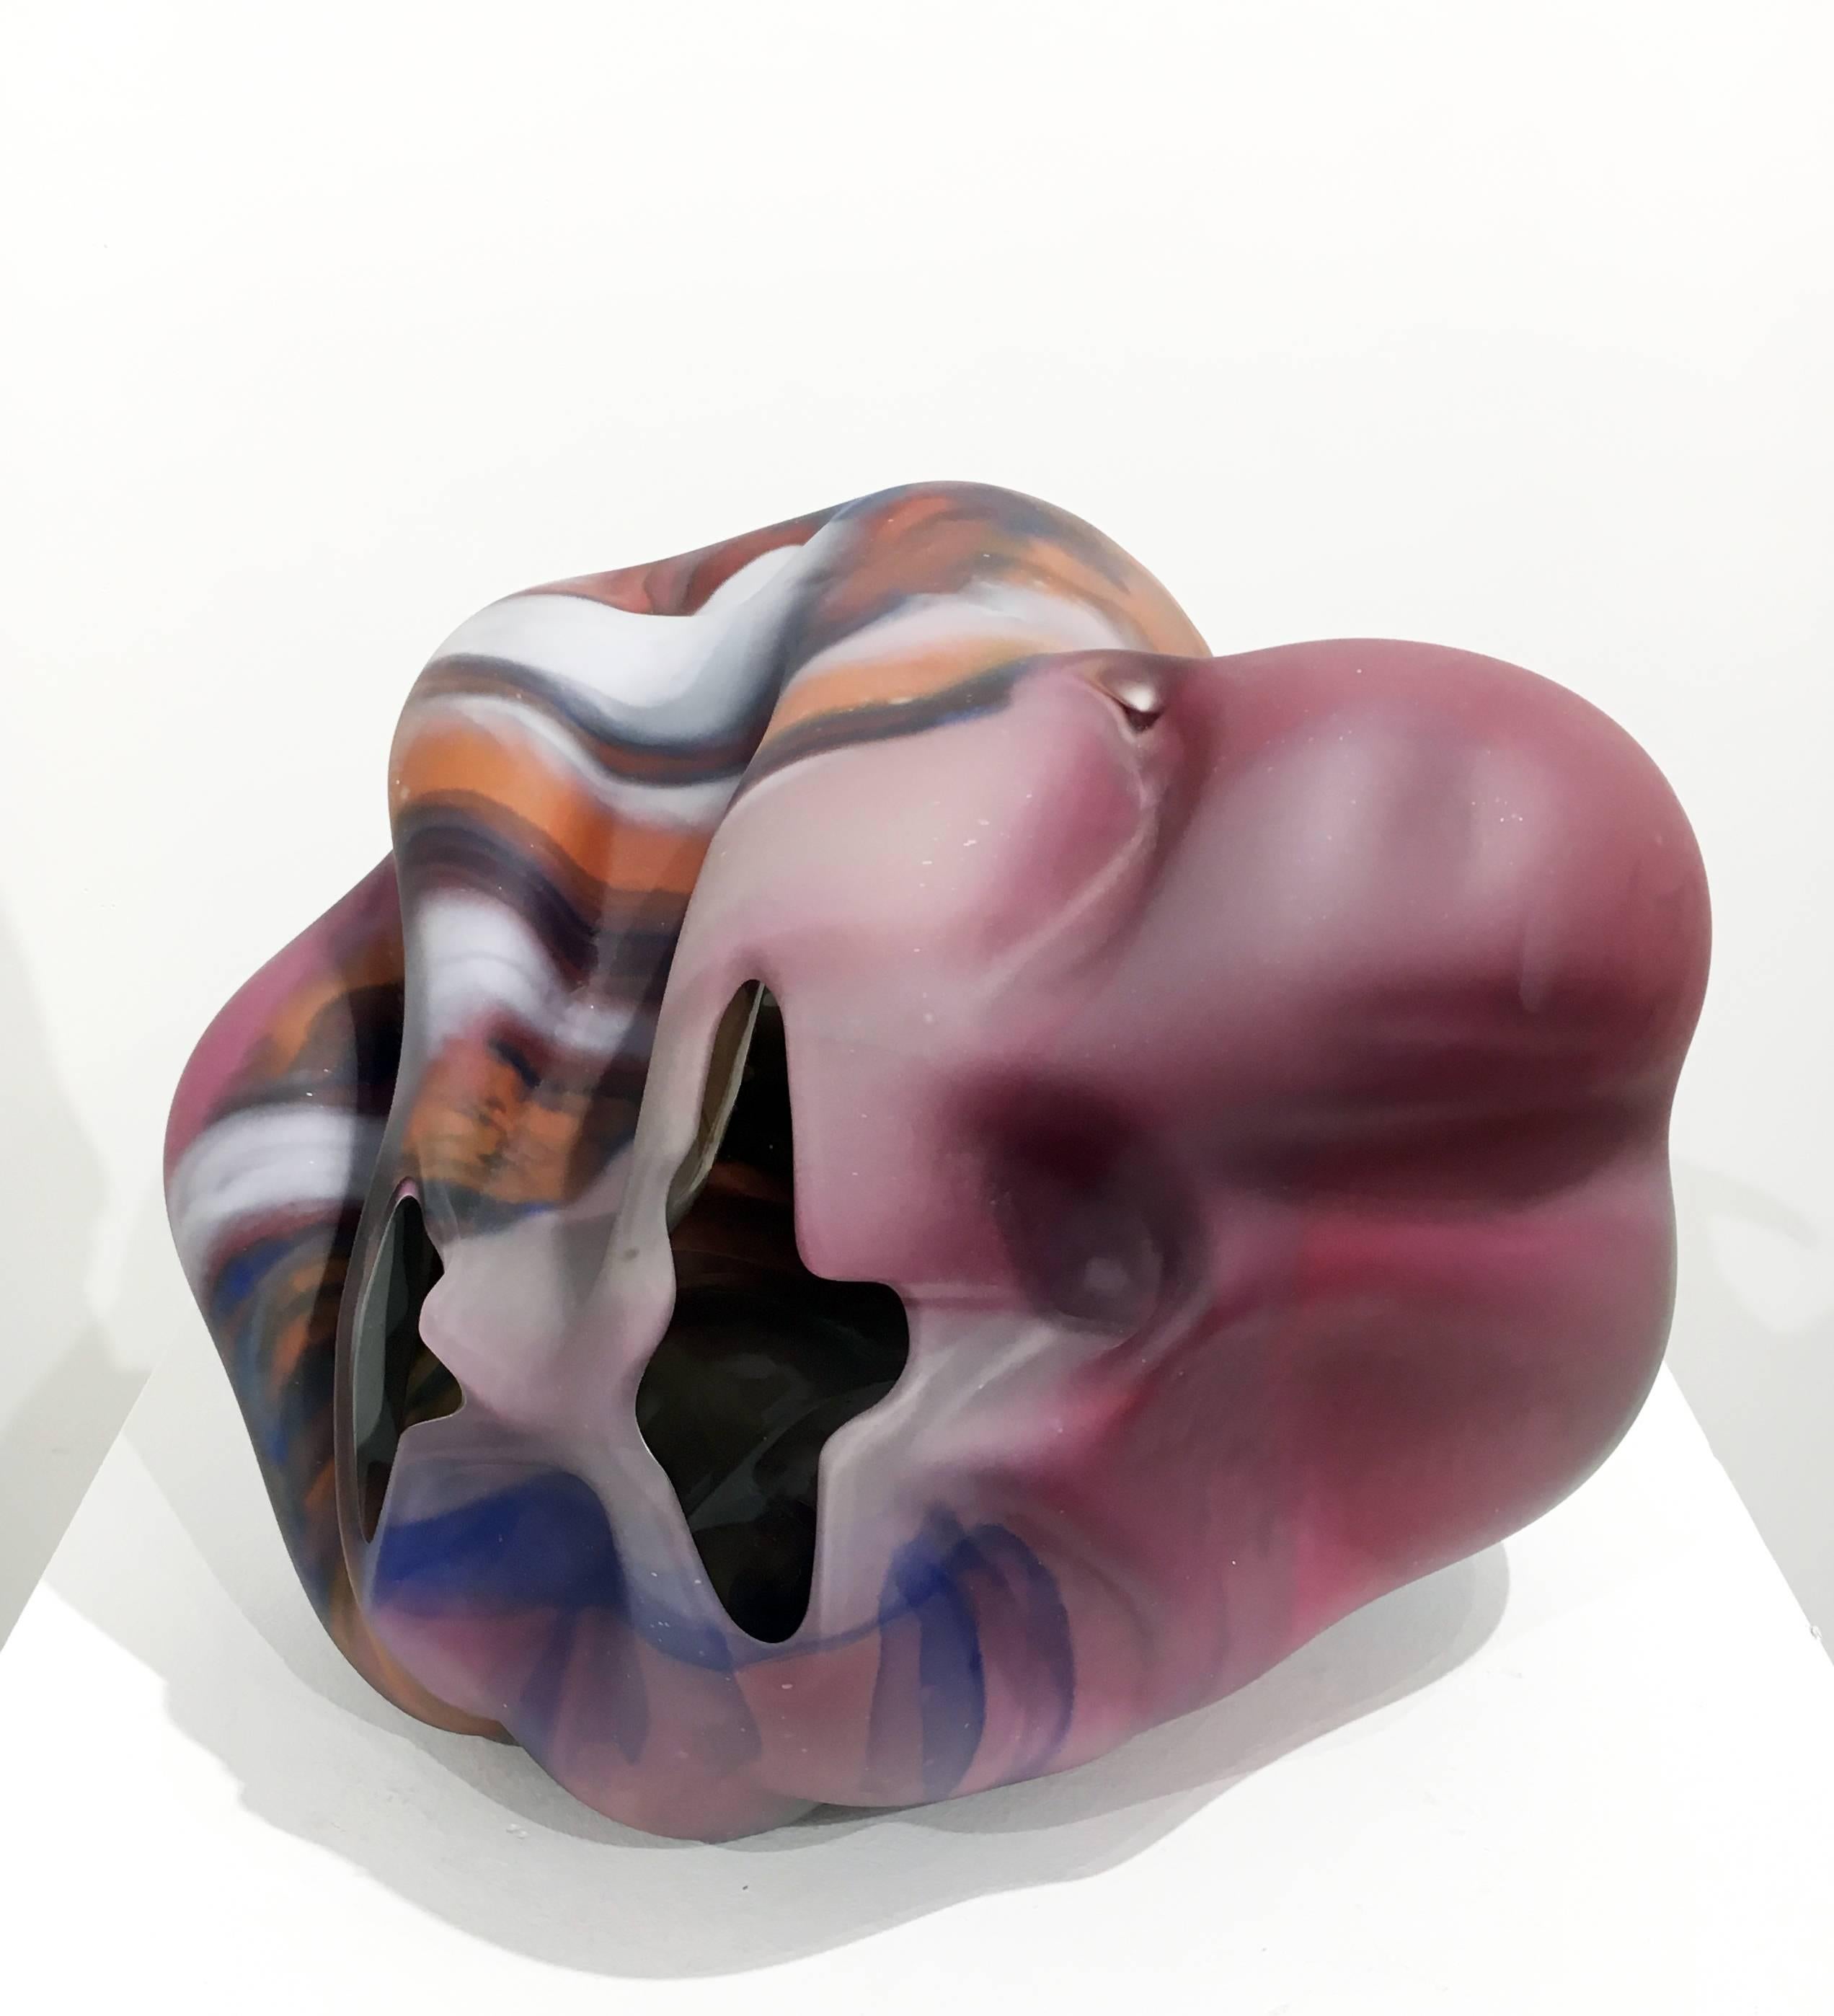 Marvin Lipofsky 1938 - 2016

Lipofsky approached glass as an organic, sculptural medium; resulting in his signature amorphic forms. Many of his works are colorful “bubbles” of glass. Often semi-transluscent, they allow the viewer to examine their